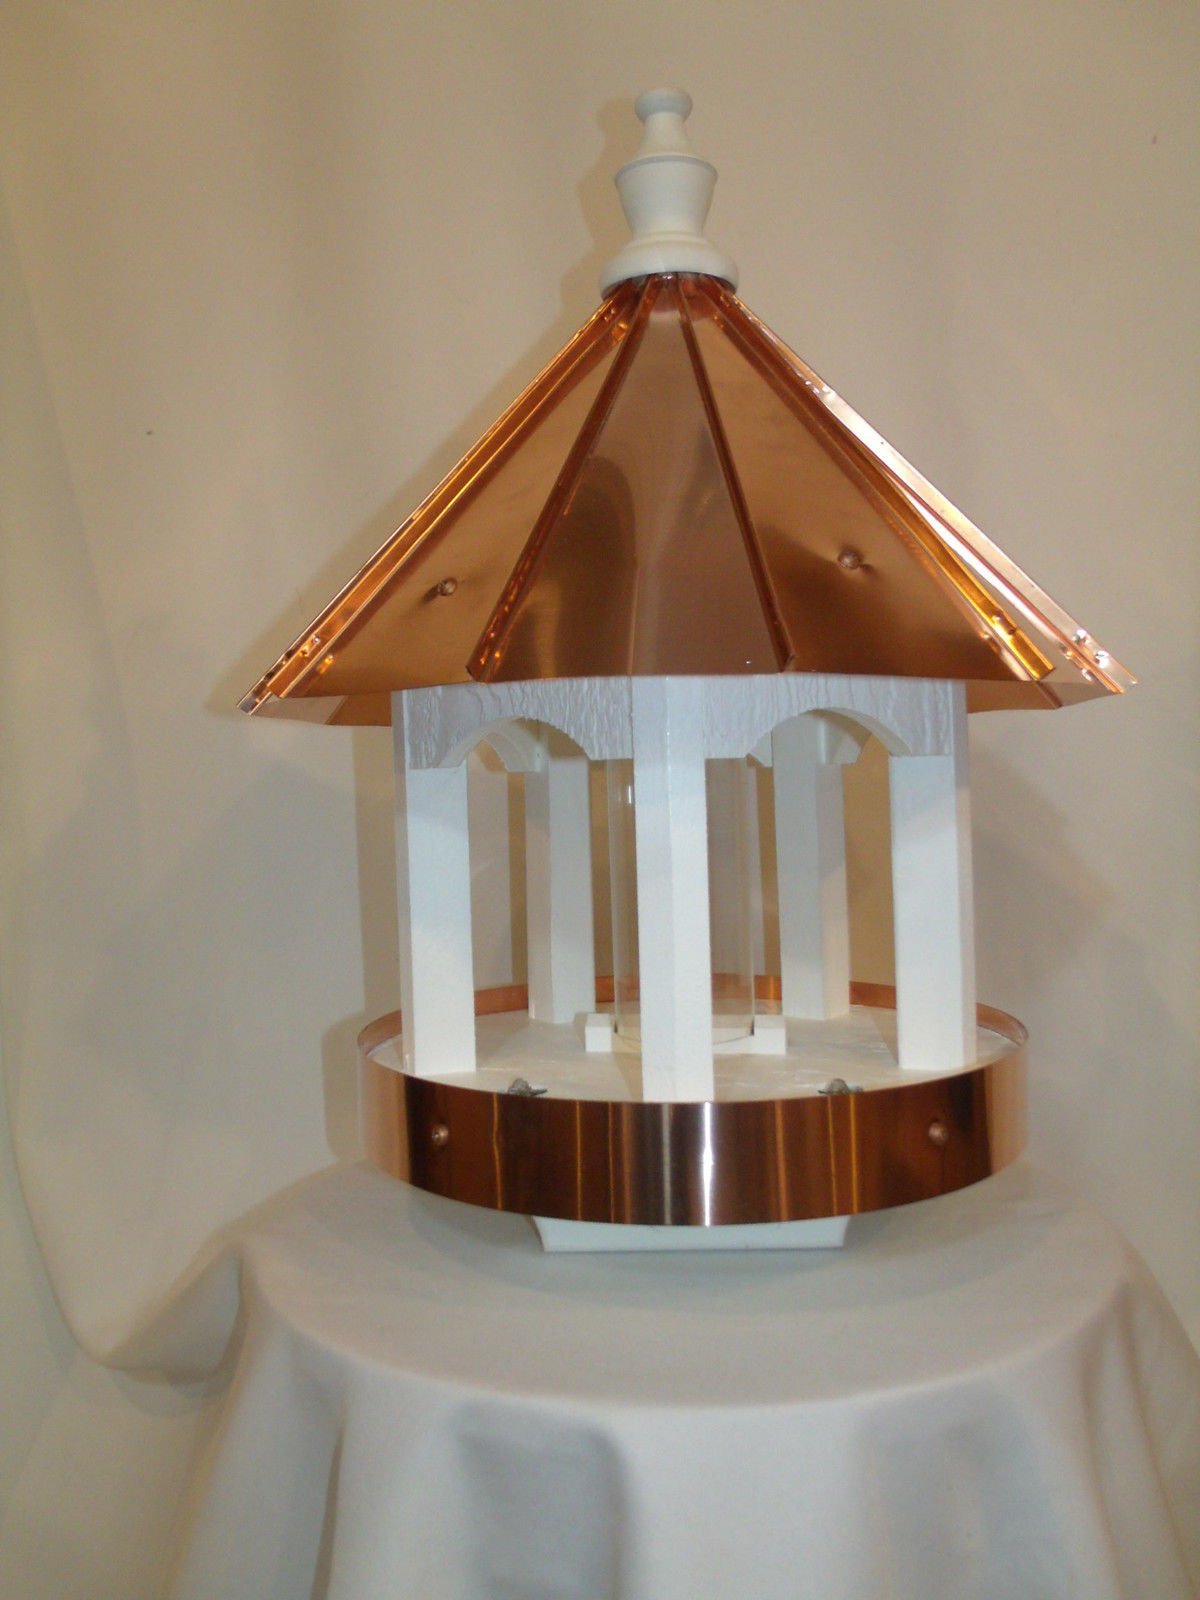 Polished Copper Top Bird Feeder with Copper Trim - 24 inches TALL